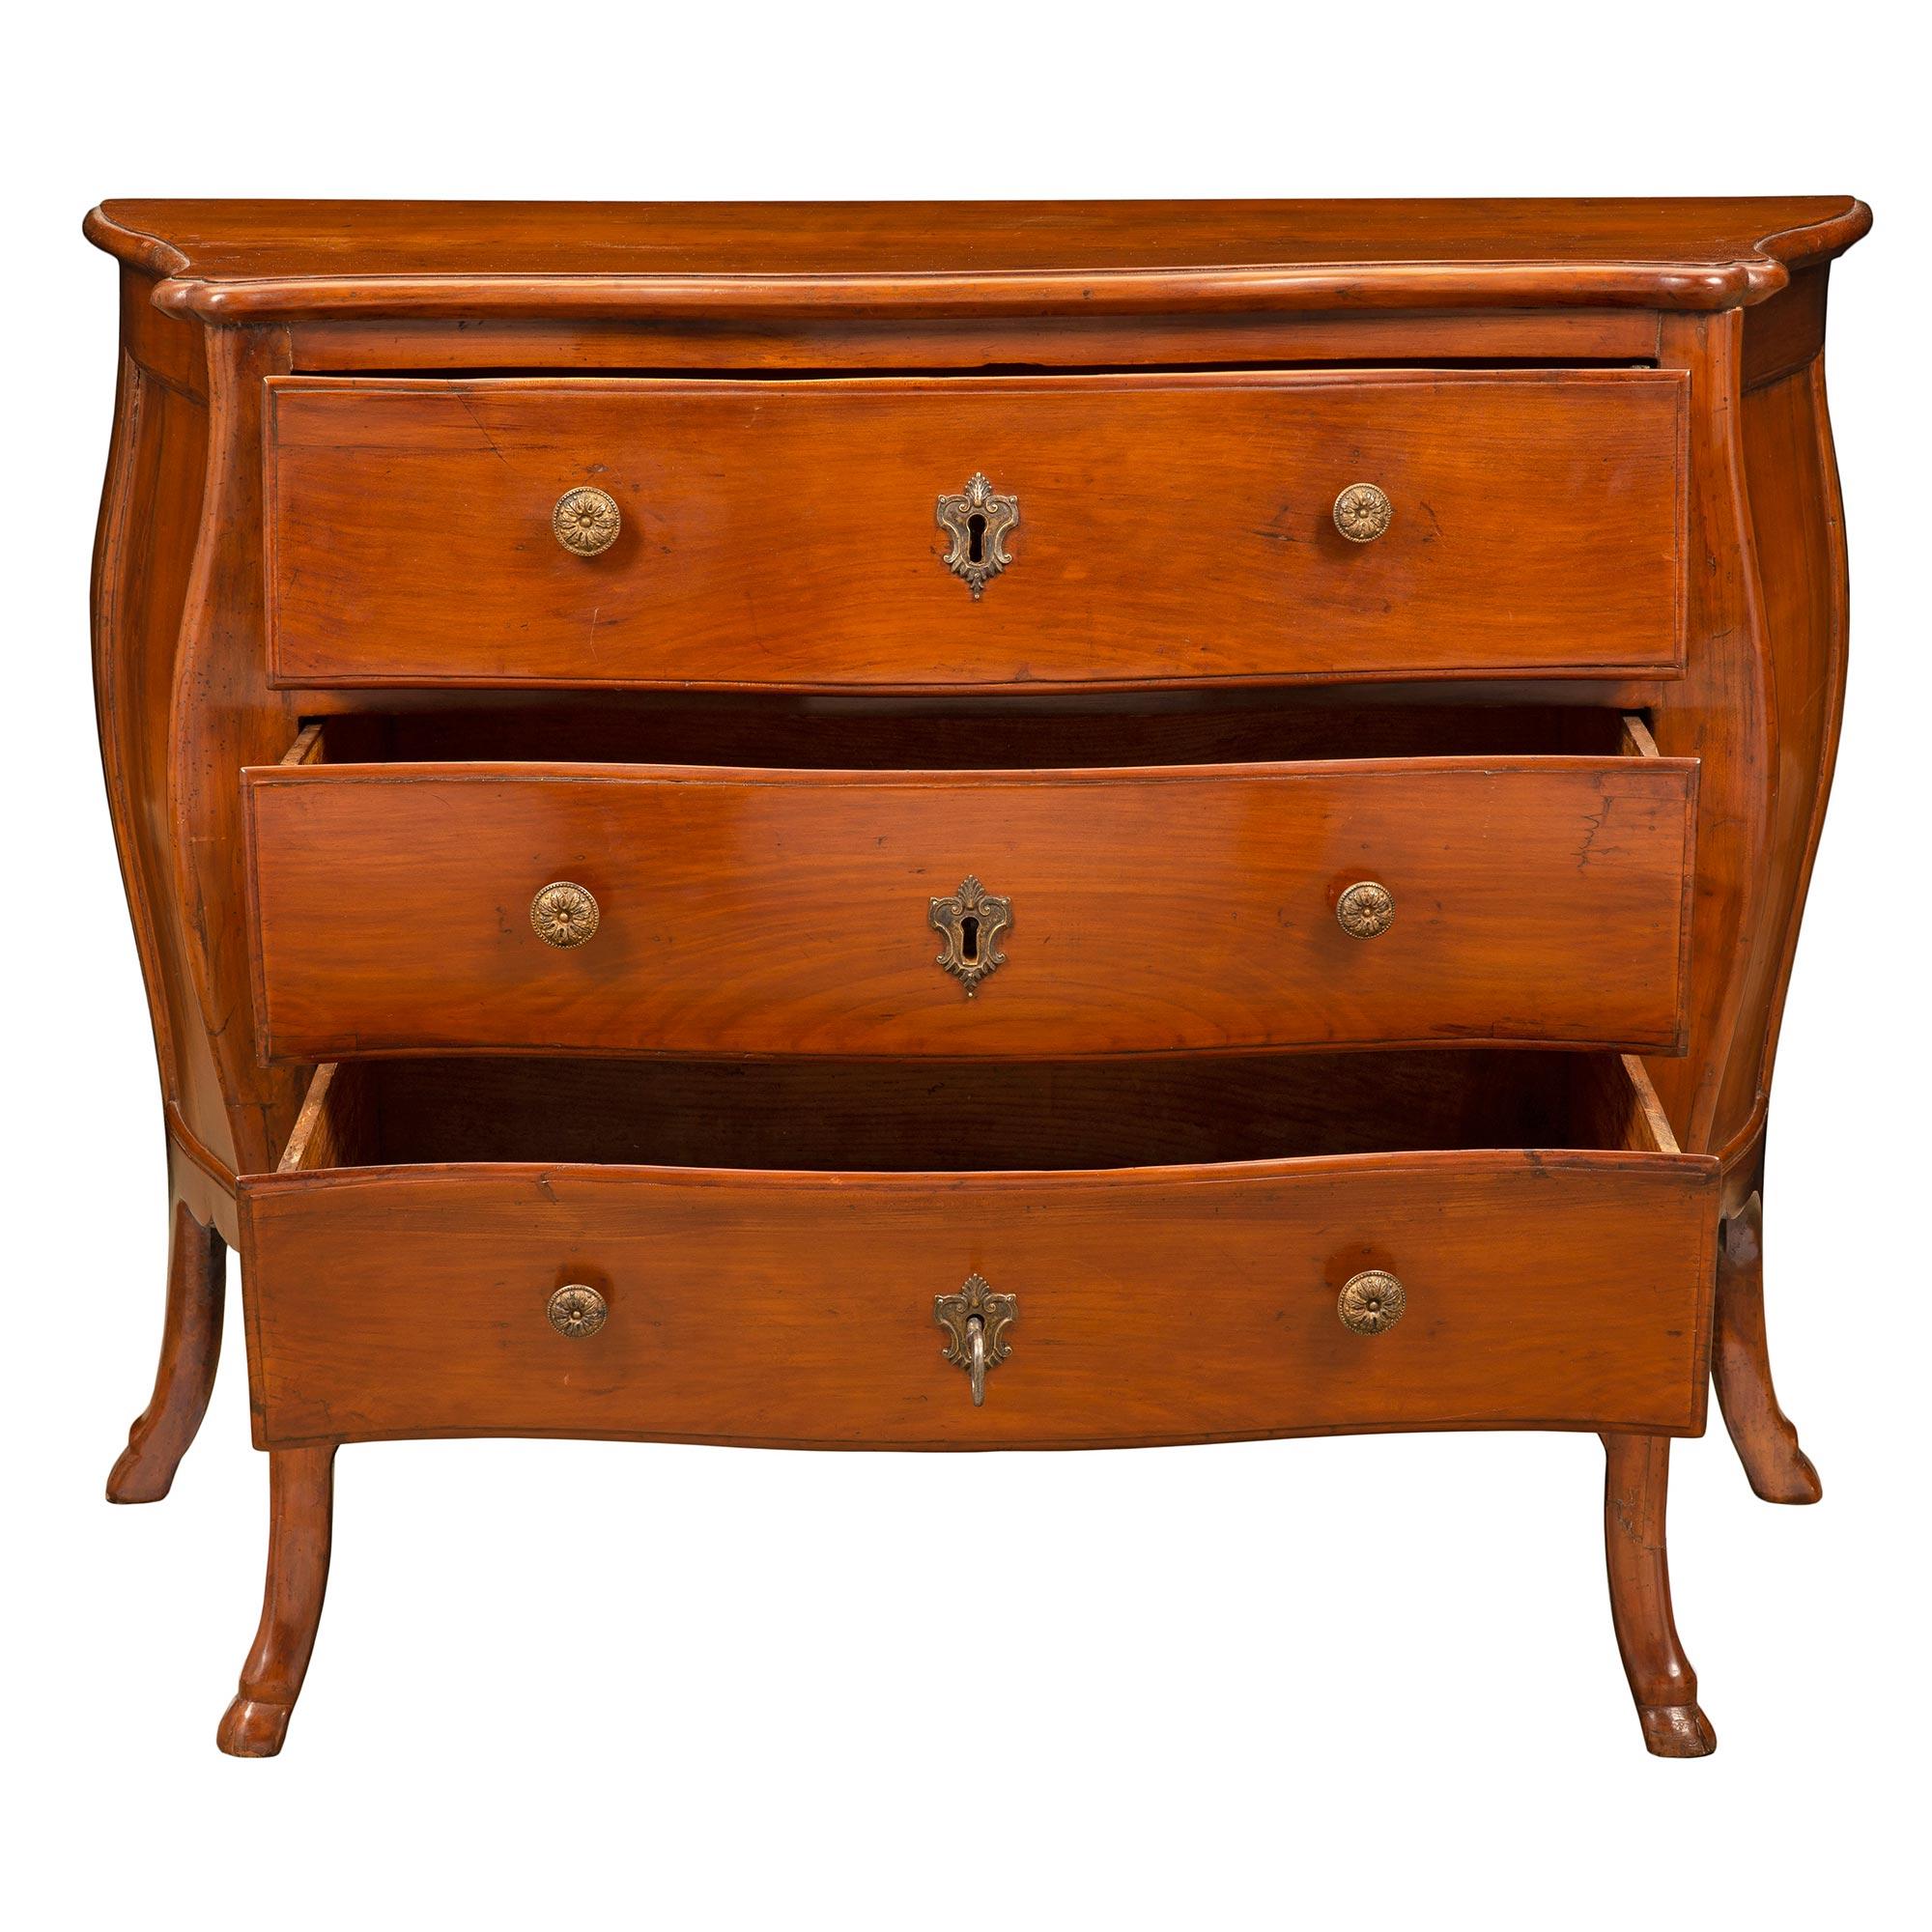 French 18th Century Louis XV Period Walnut Petite Commode Bordelaise In Good Condition For Sale In West Palm Beach, FL